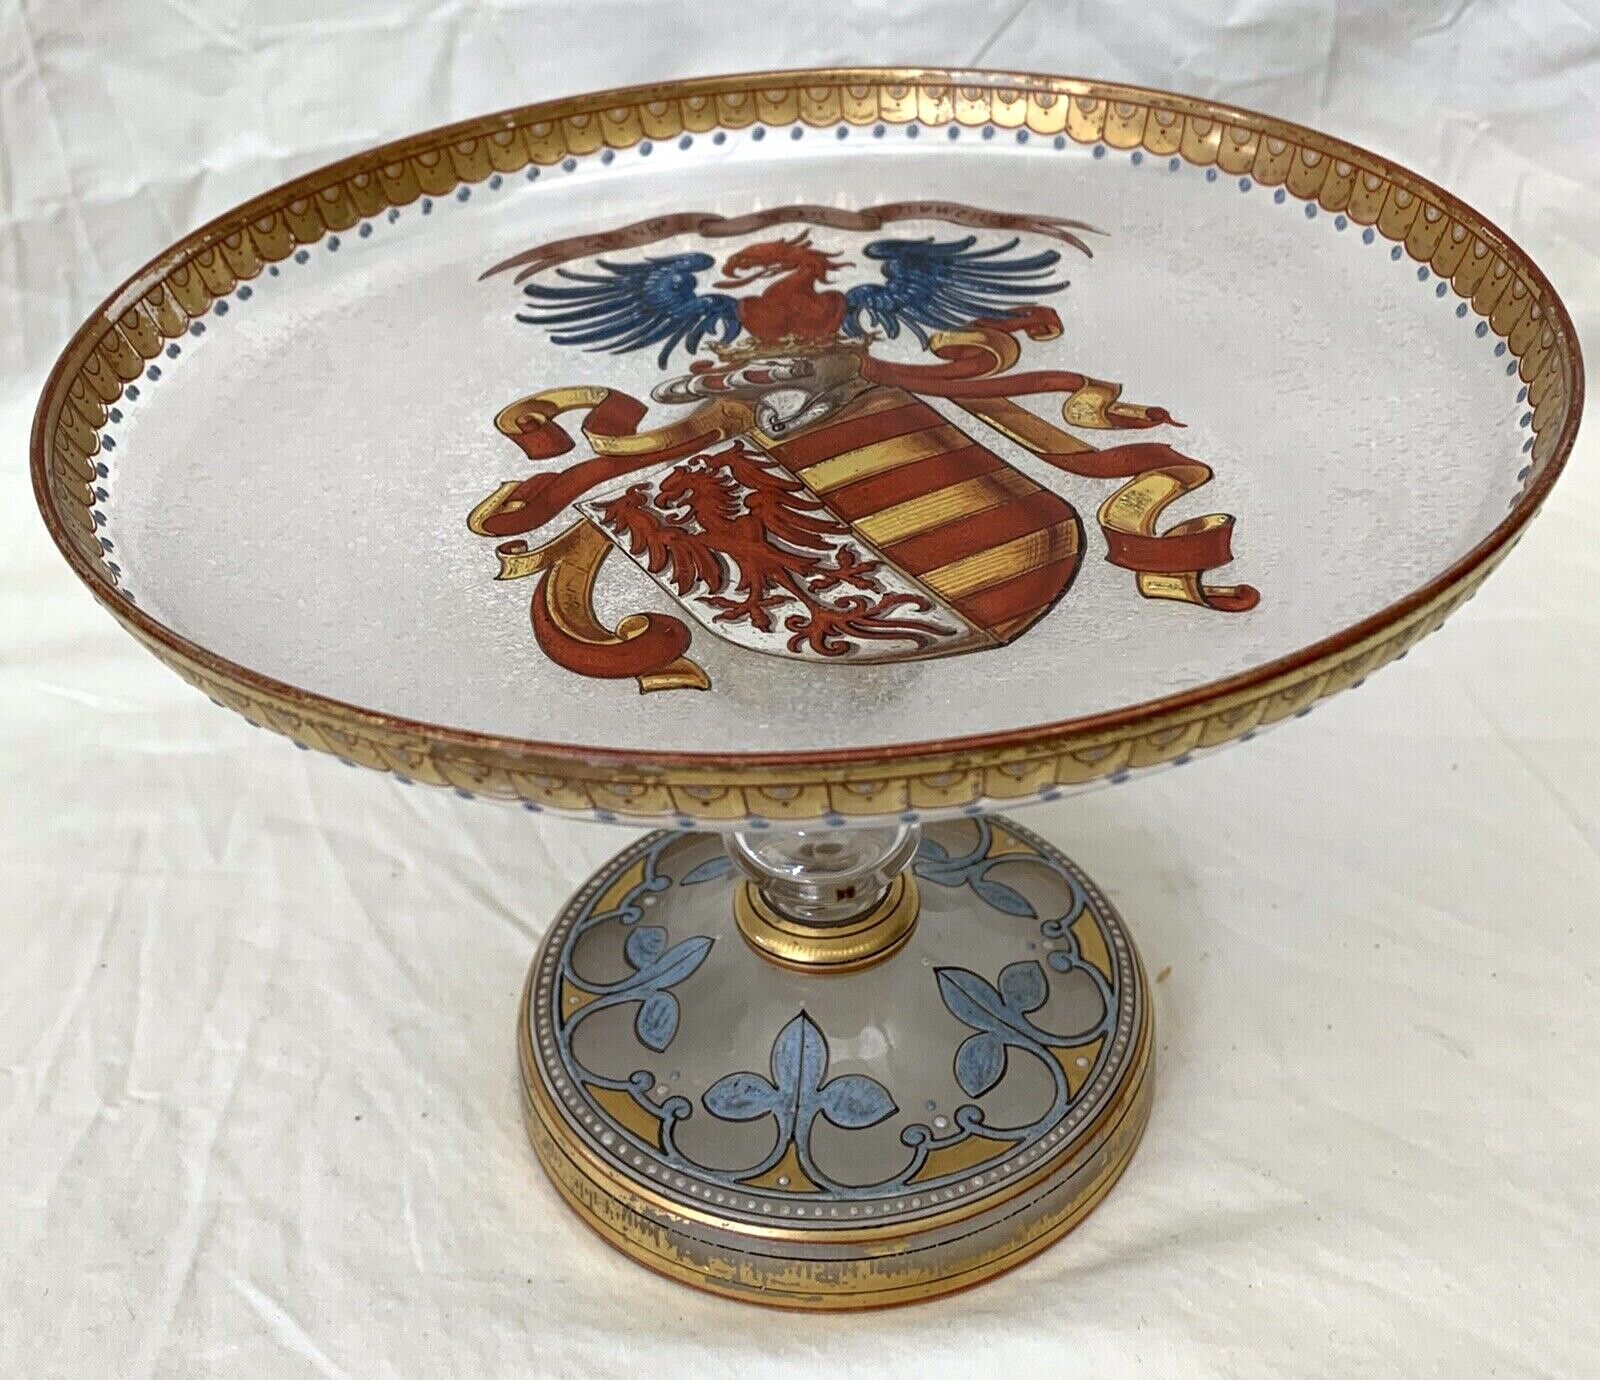 AN IMPORTANT FINE HAND PAINTED ENAMEL ON PEDESTAL GLASS DISH CIRCA 1700